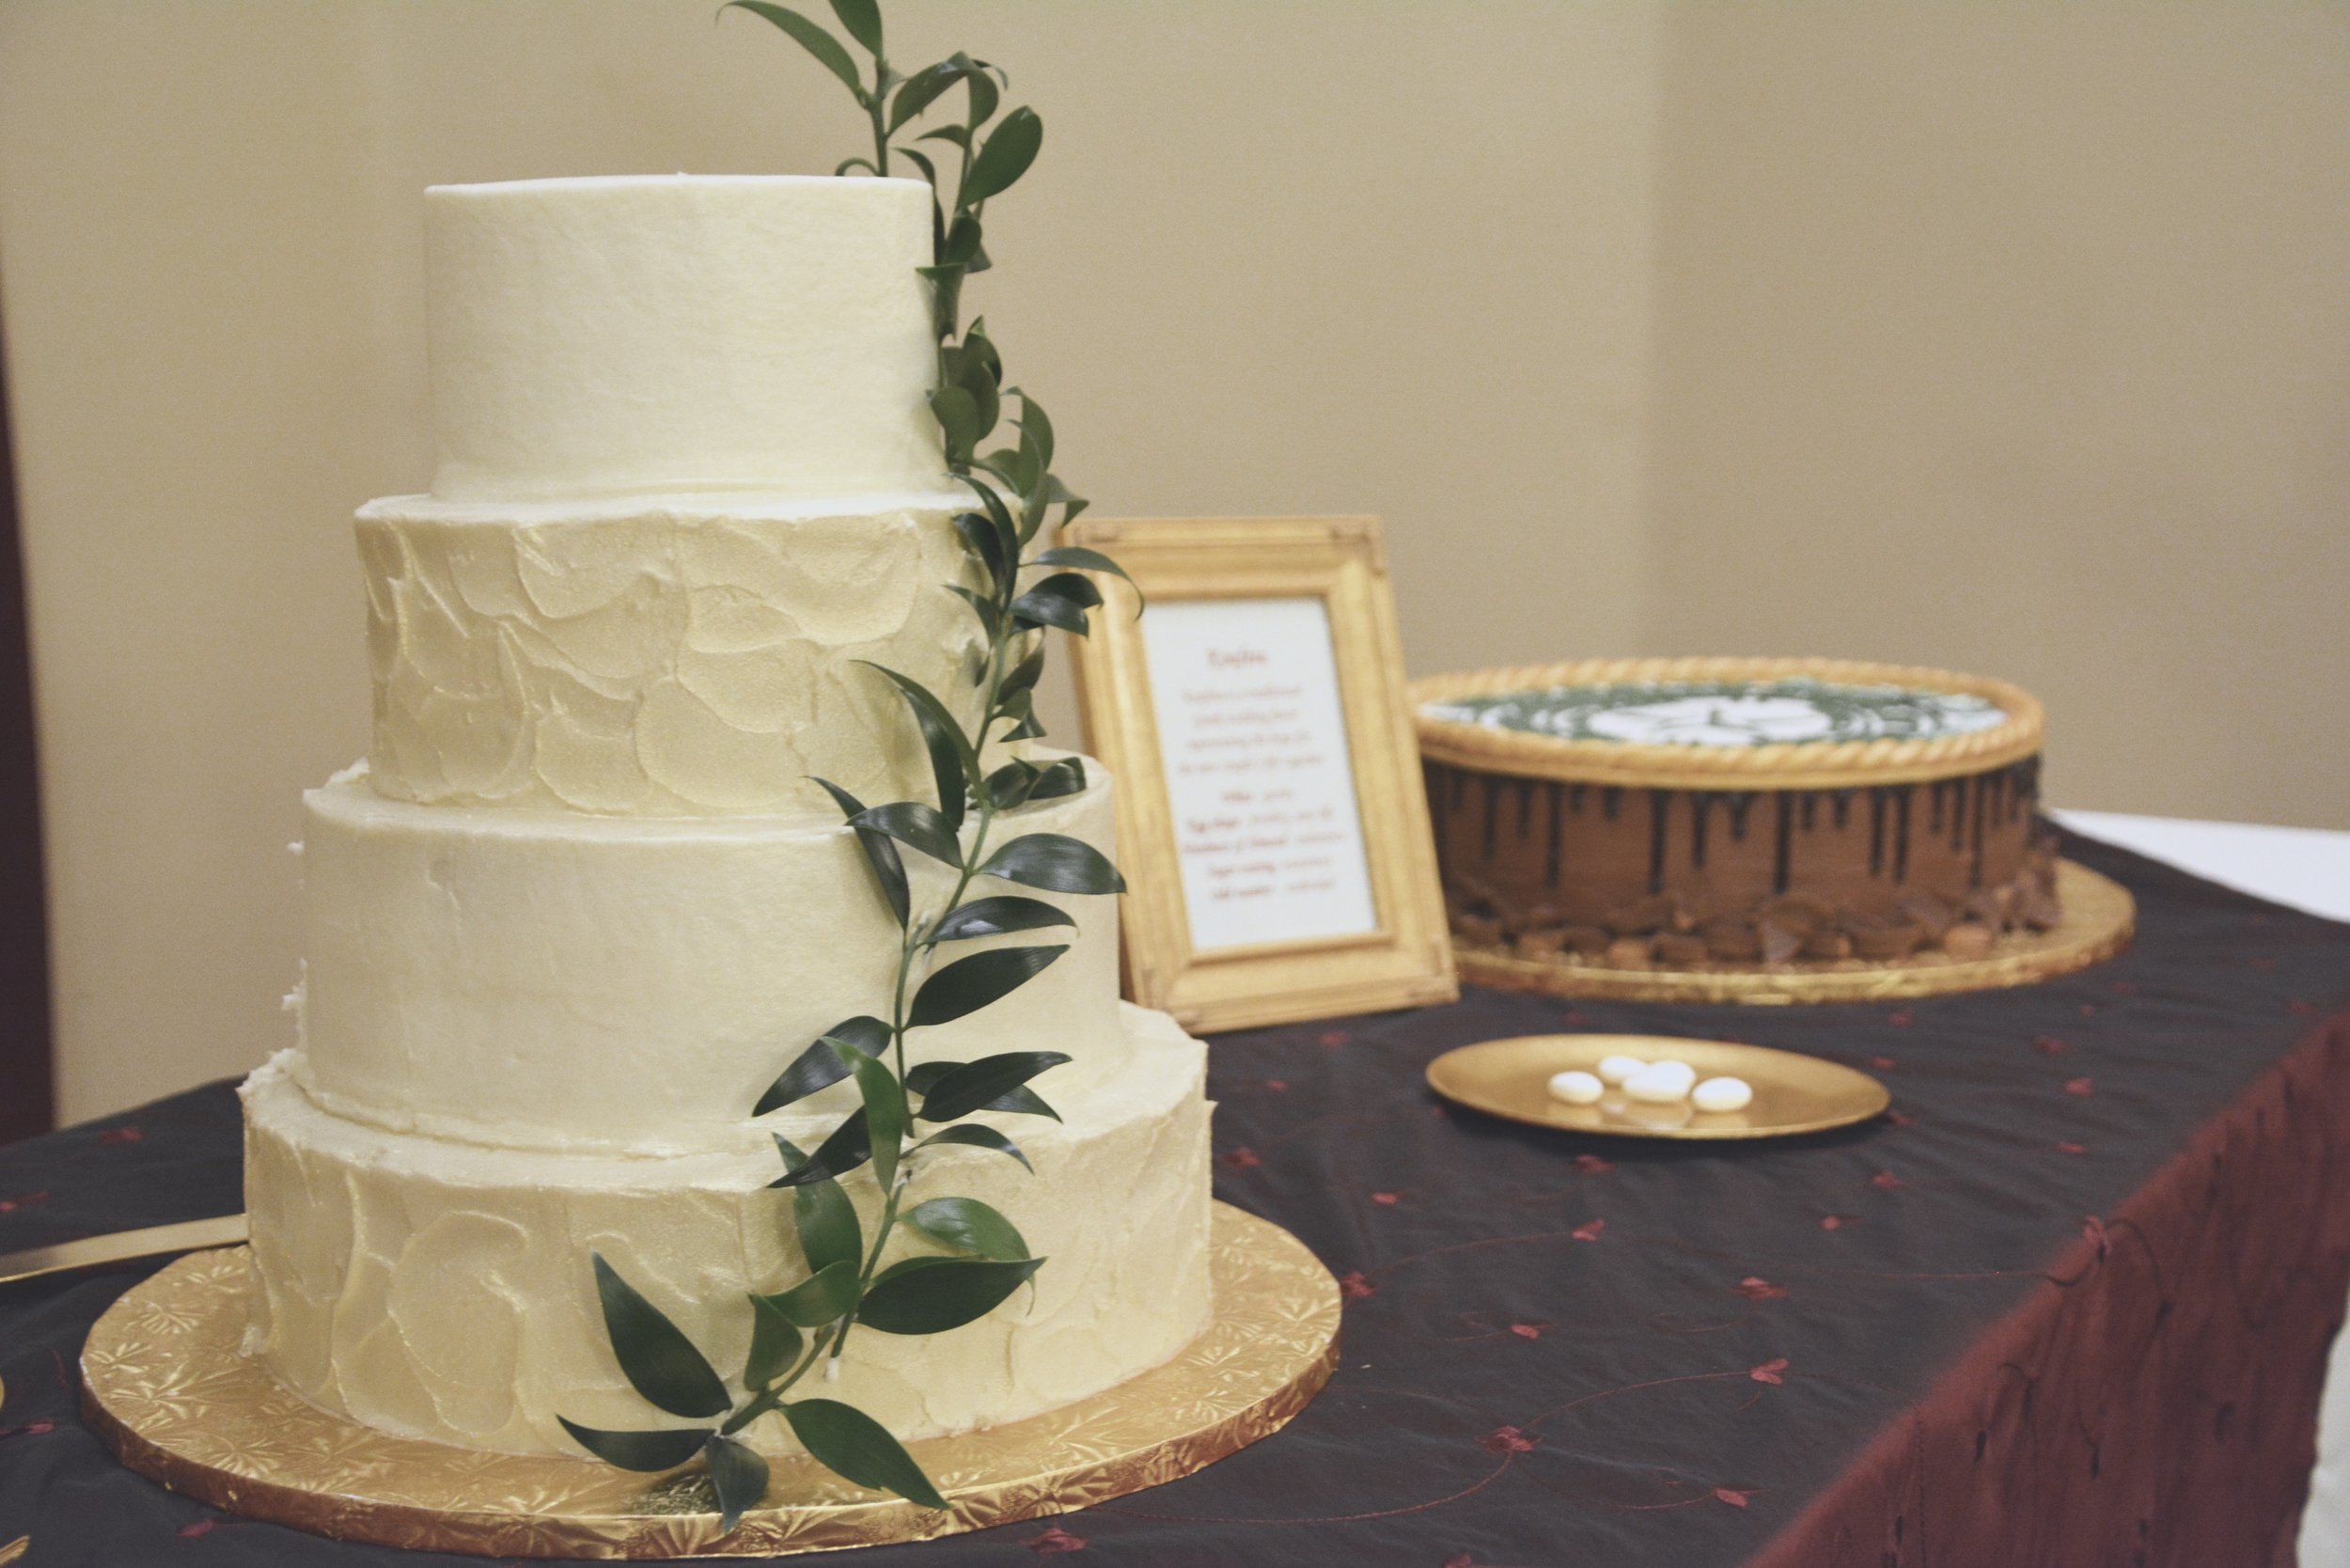 dallas wedding cake bakeries, annie's culinary creations, wedding cakes, baylor grooms cake, baylor seal cake, chocolate peanut butter cake, champange cake, gold and white cake with greenery, bakery in dallas, heidi lockhart somes photography, greek…